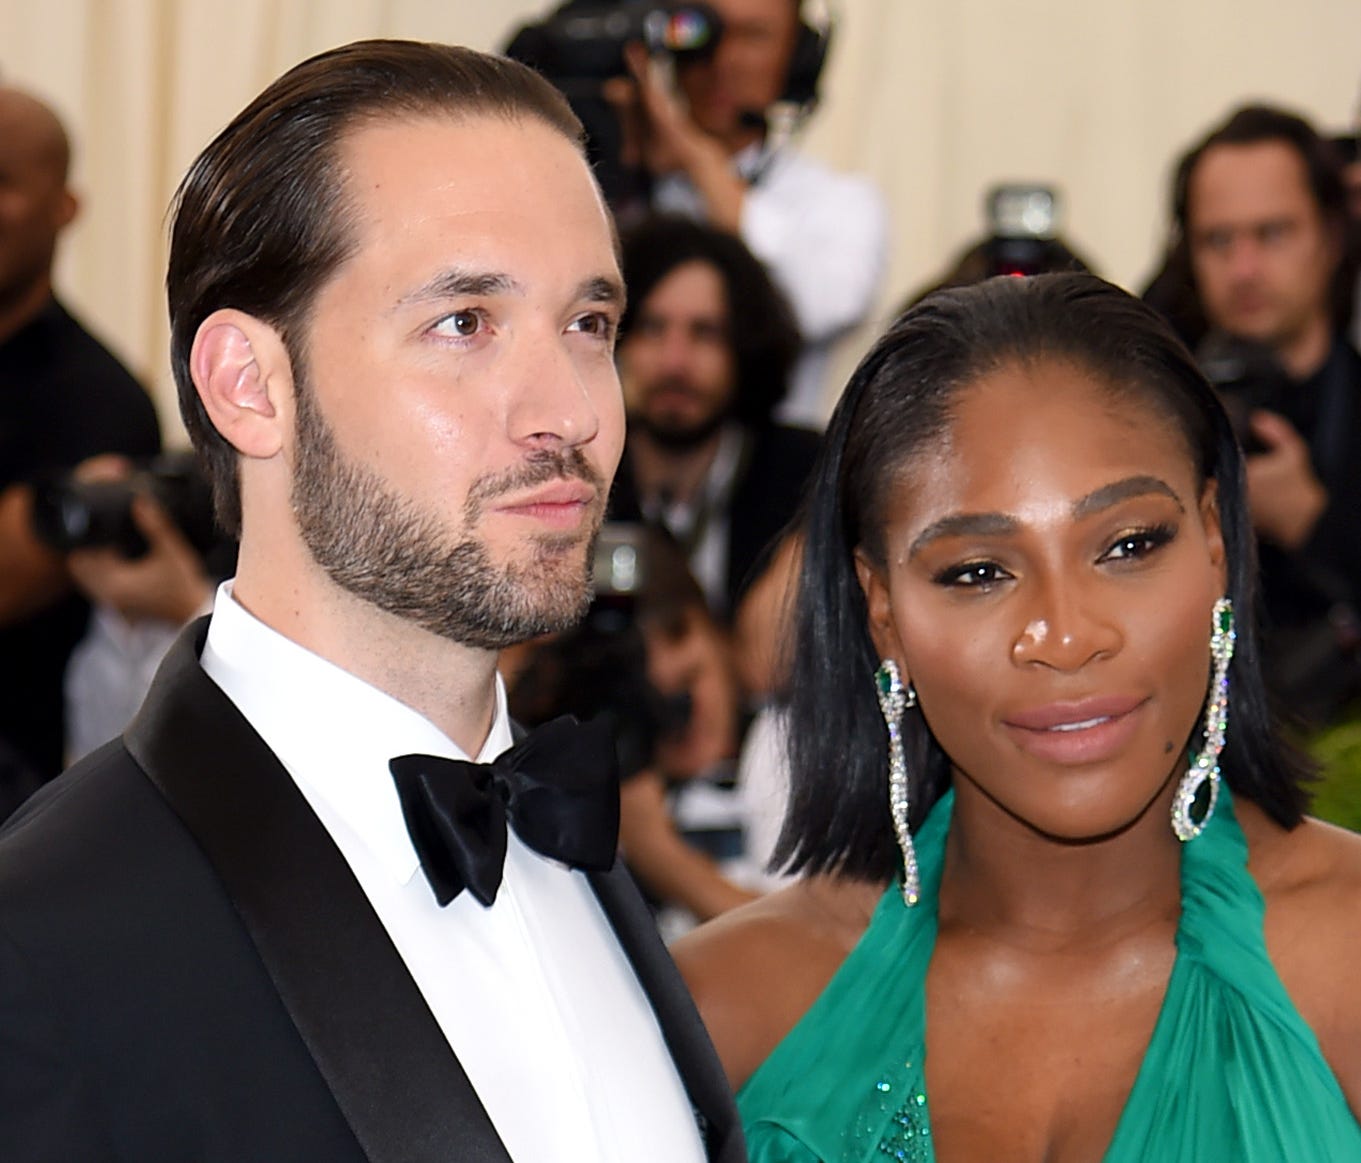 Alexis Ohanian and Serena Williams attend the 